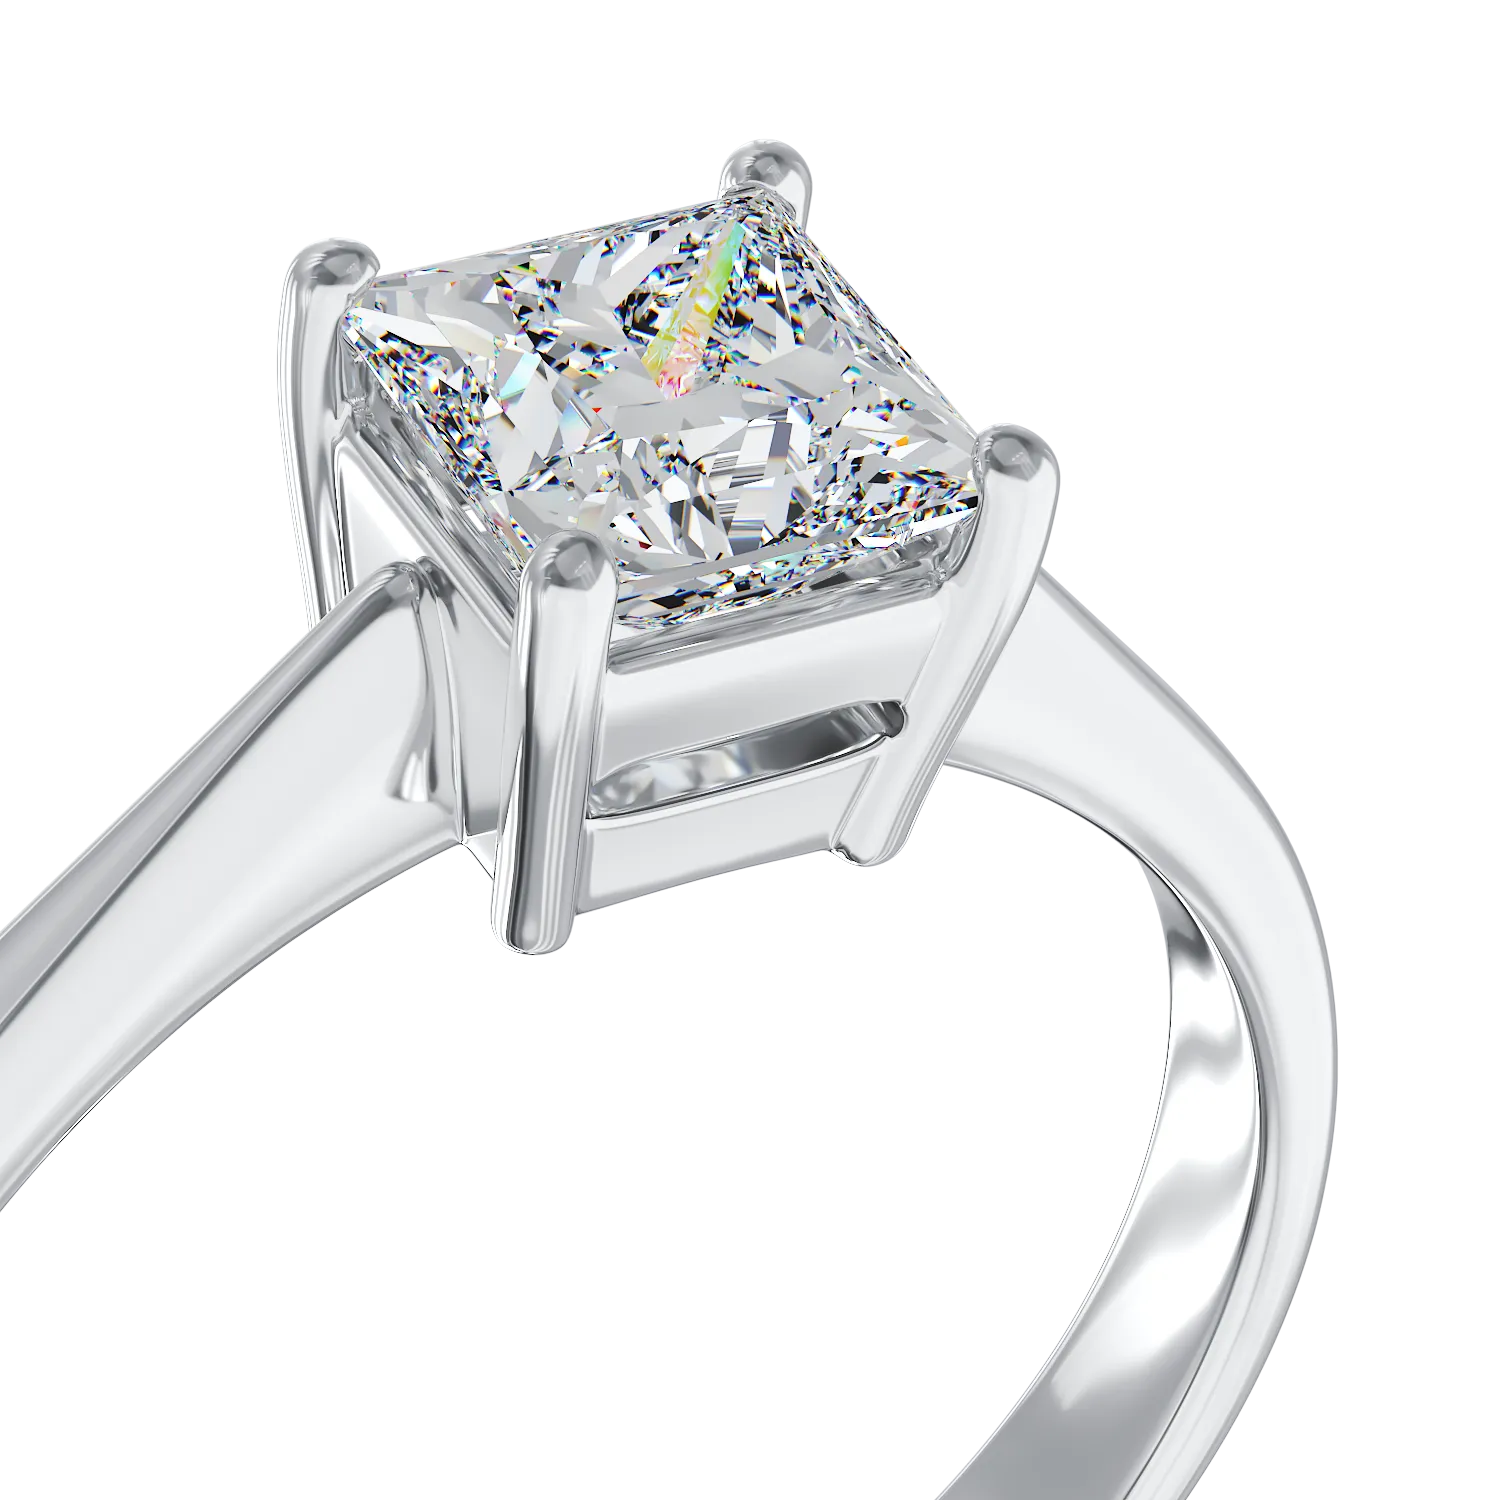 18K white gold engagement ring with a 0.91ct solitaire diamond